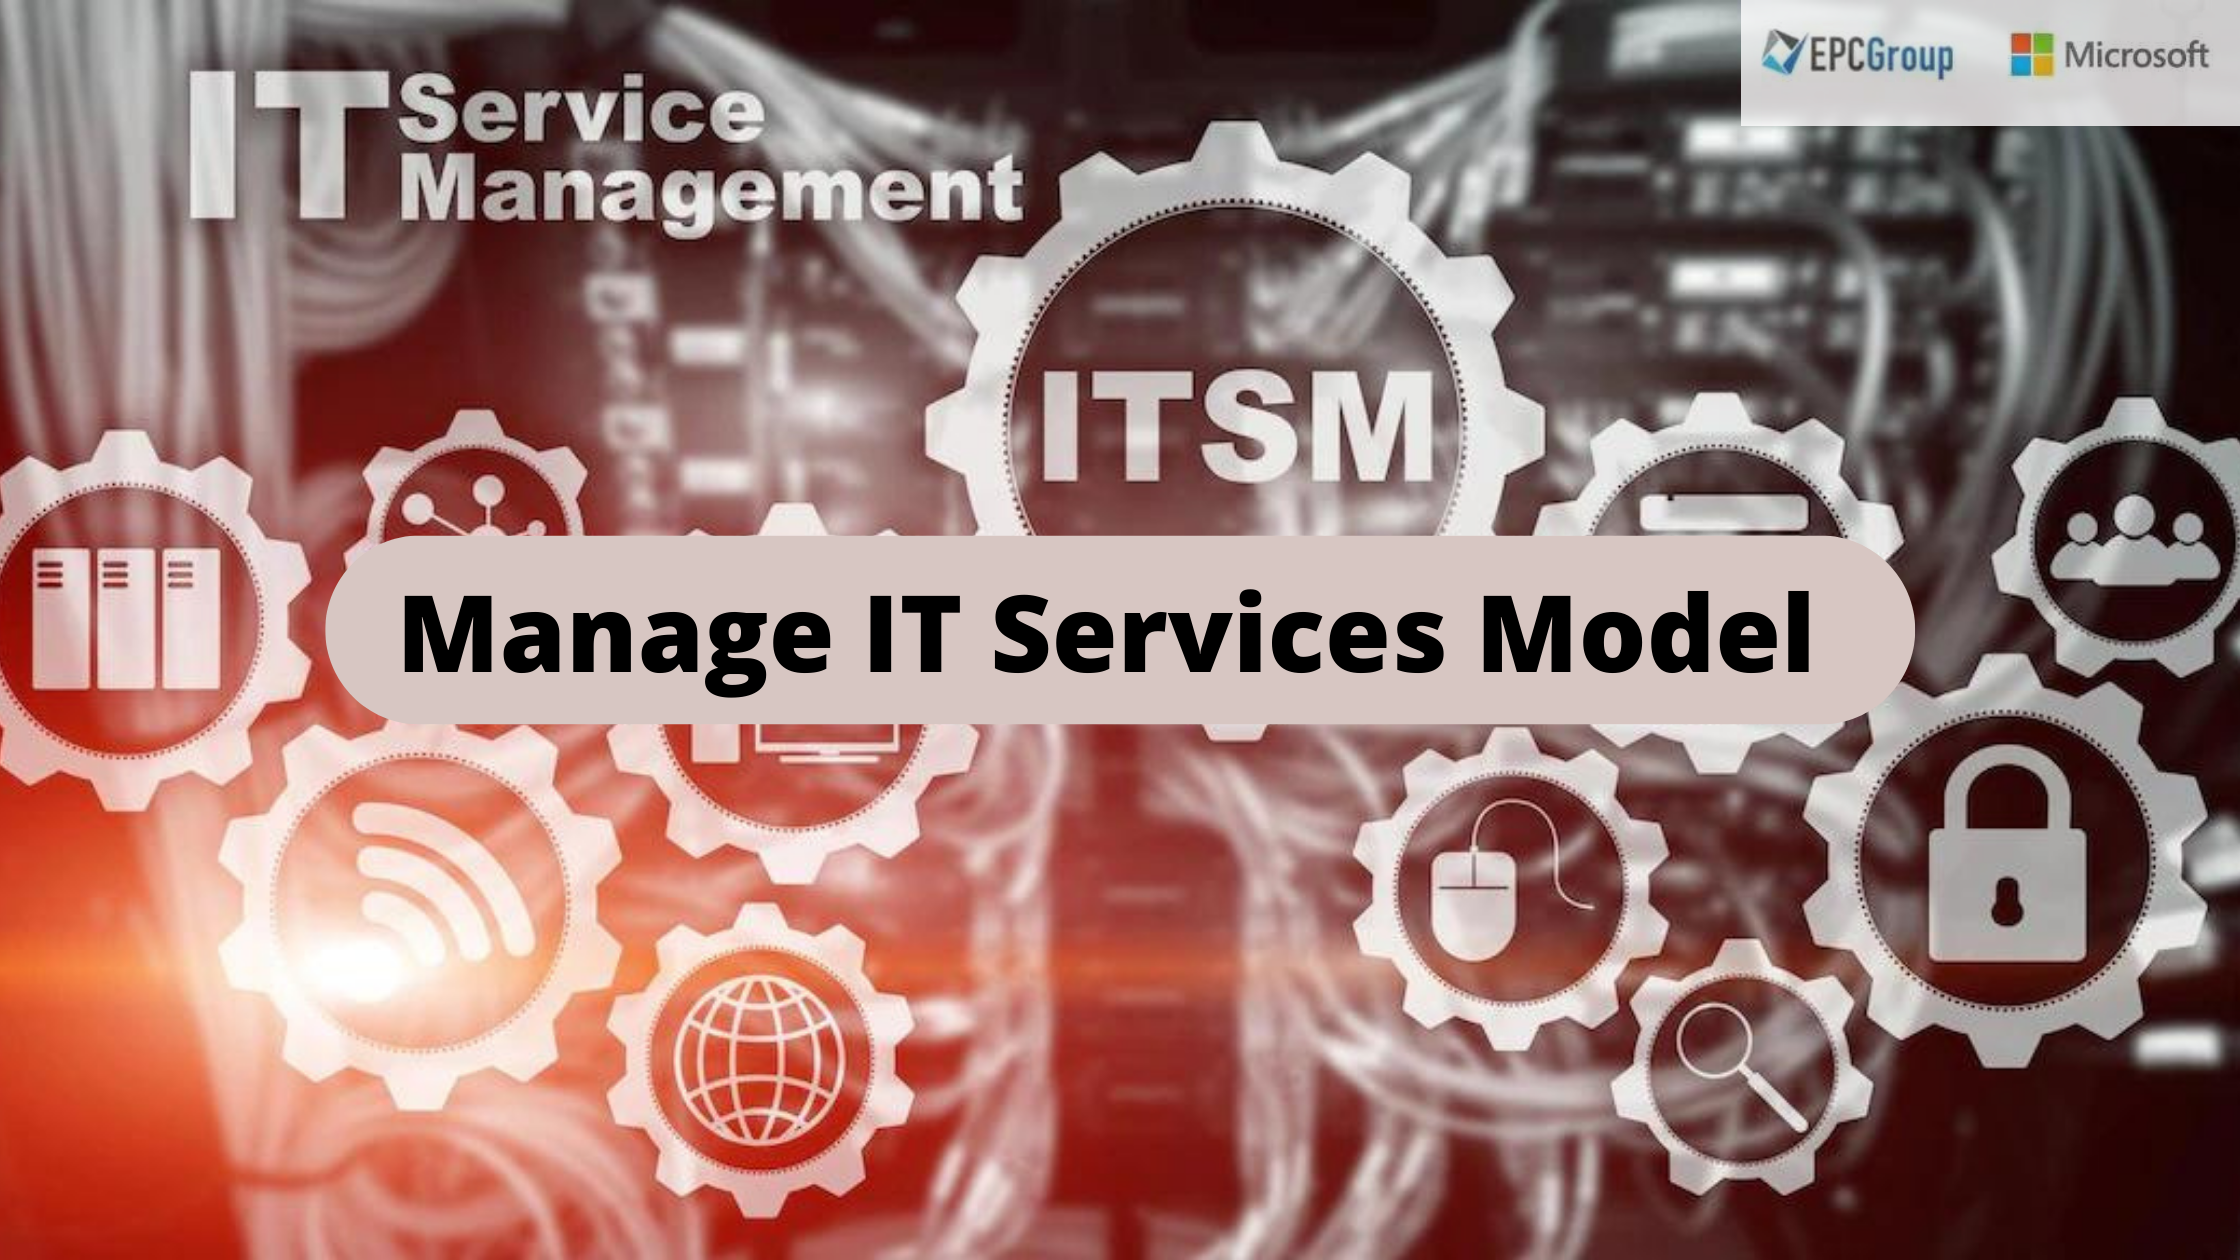 Manage IT Services Model (A Simple And Workable Model For Managing Your IT Services) - thumb image